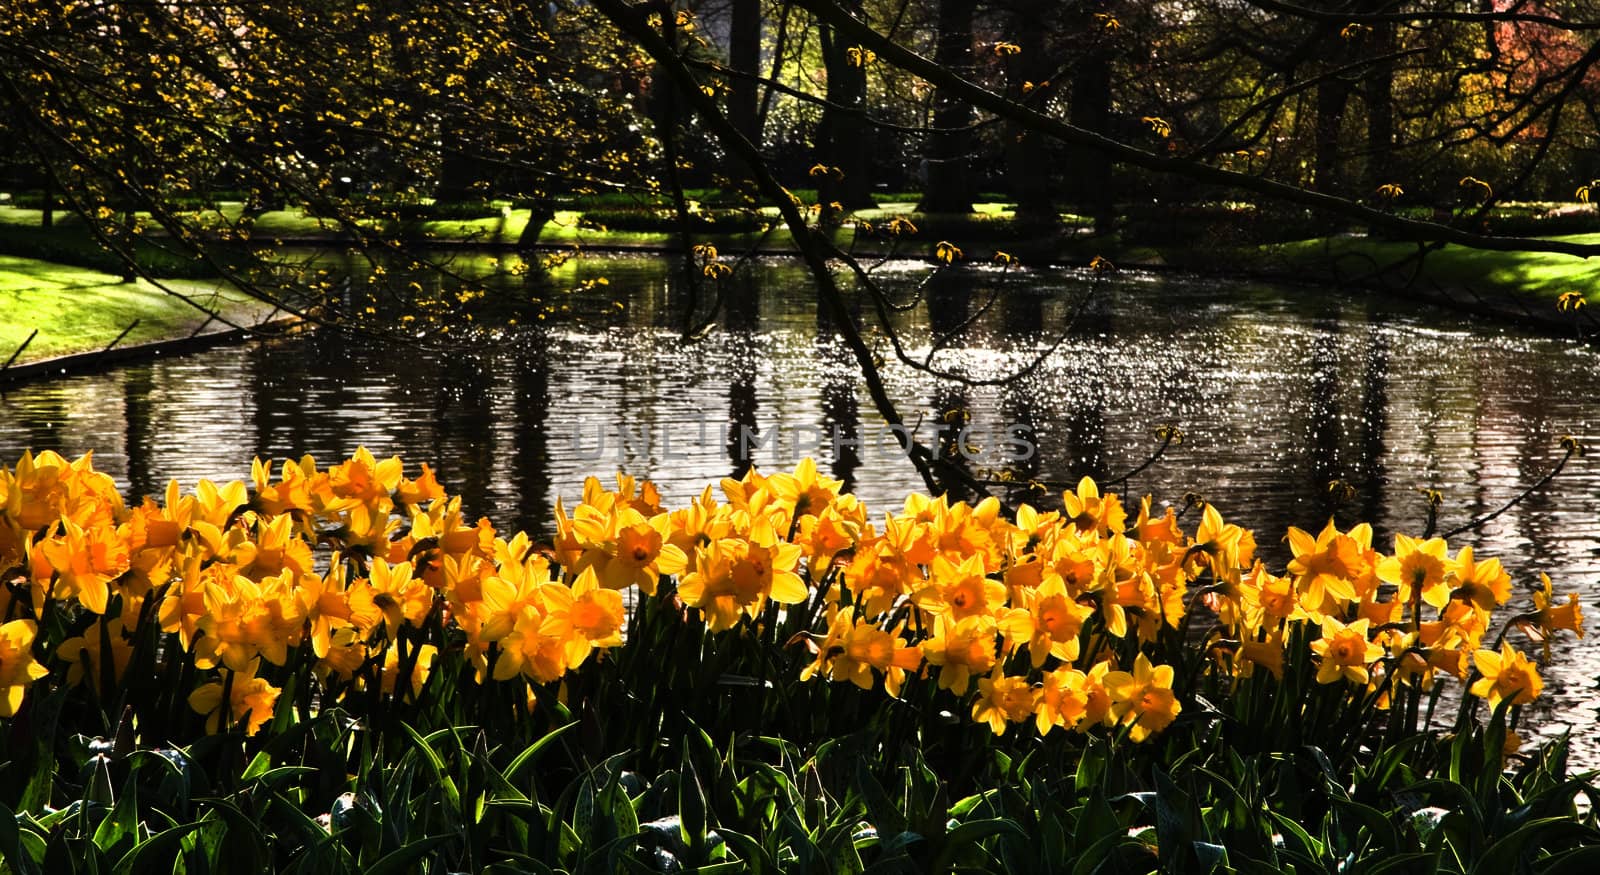 Pond with yellow daffodils by Colette